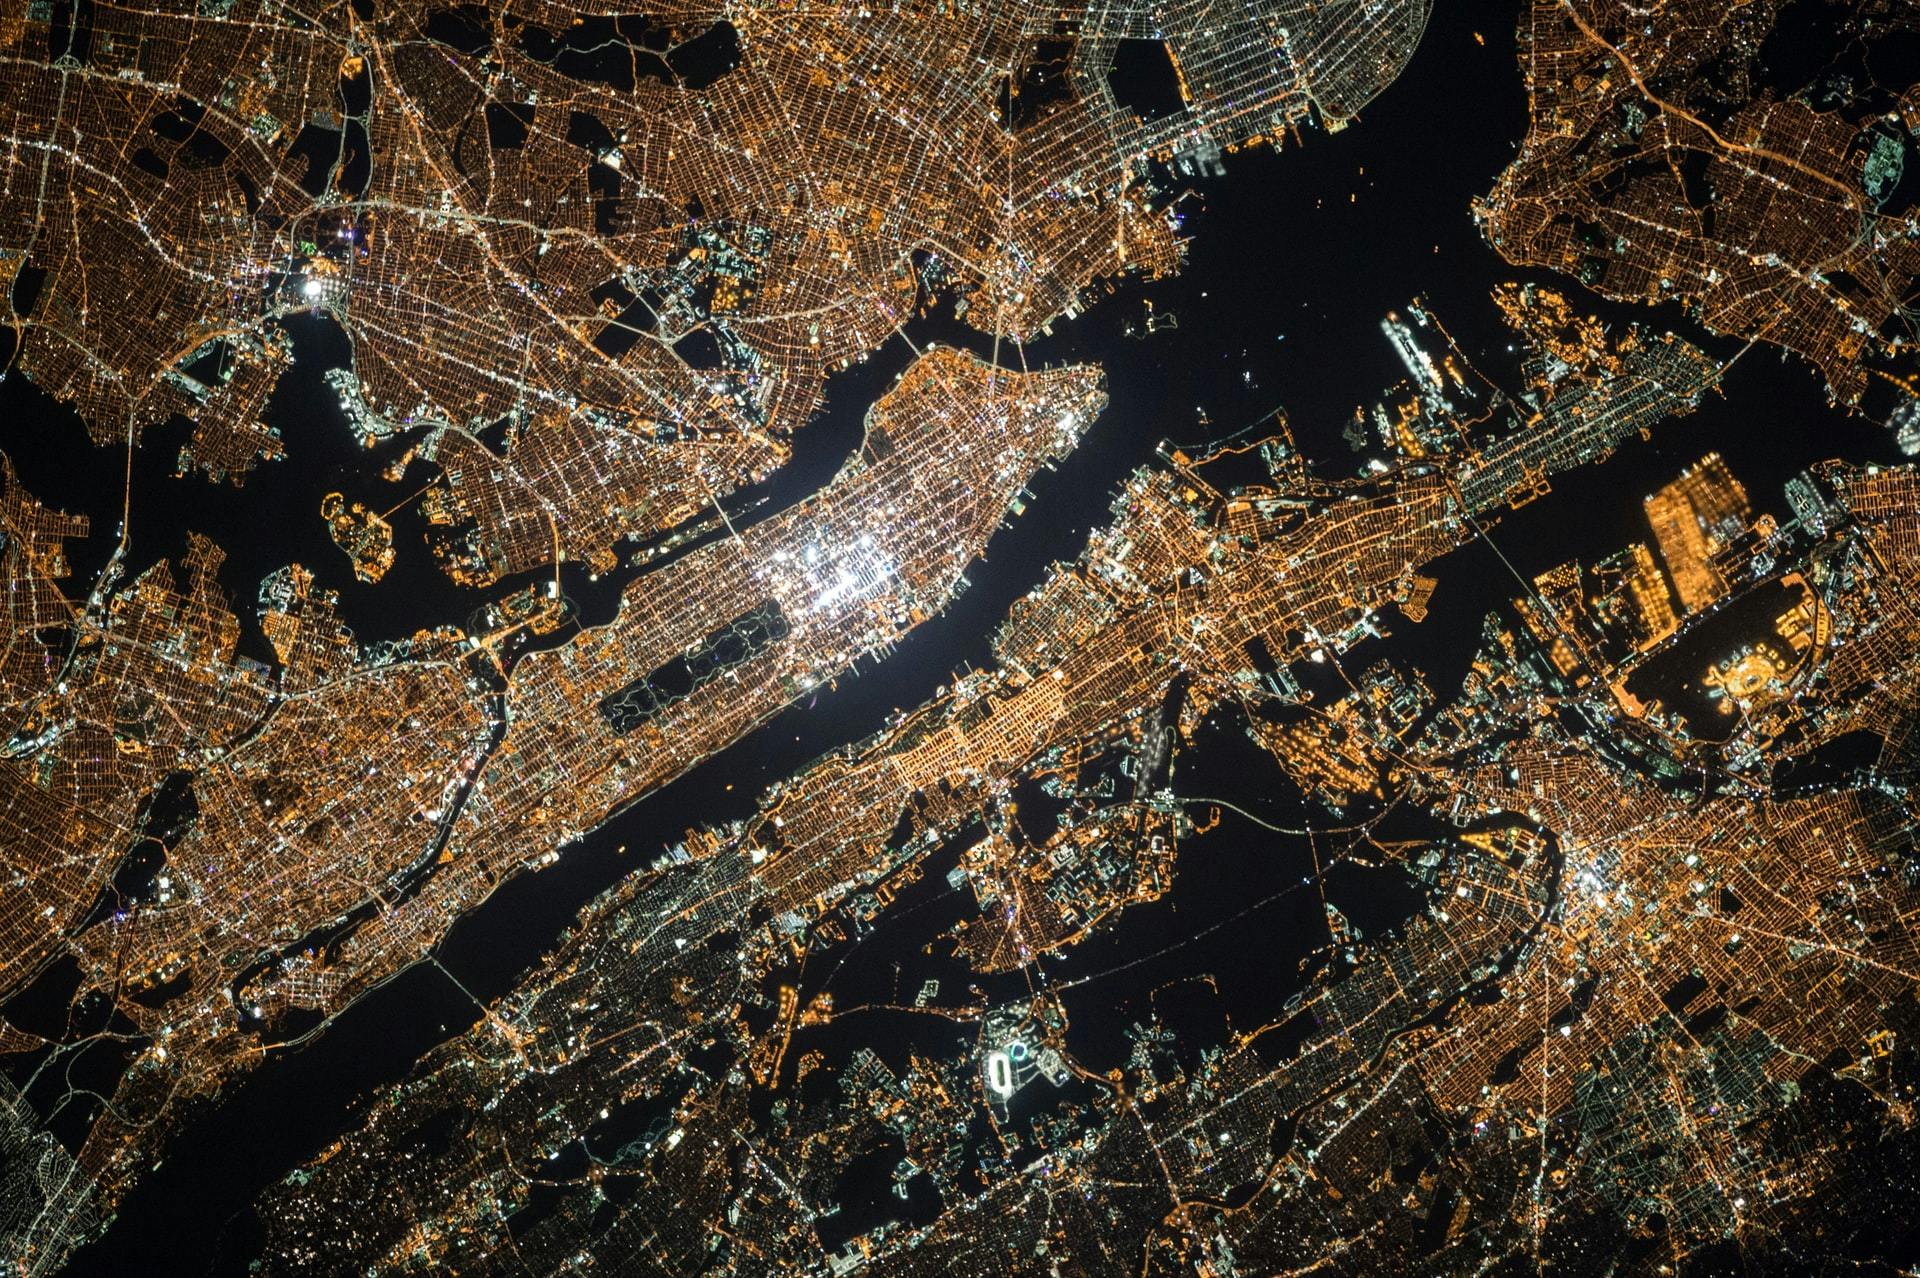 Aerial photo of a city at night. By NASA on Unsplash